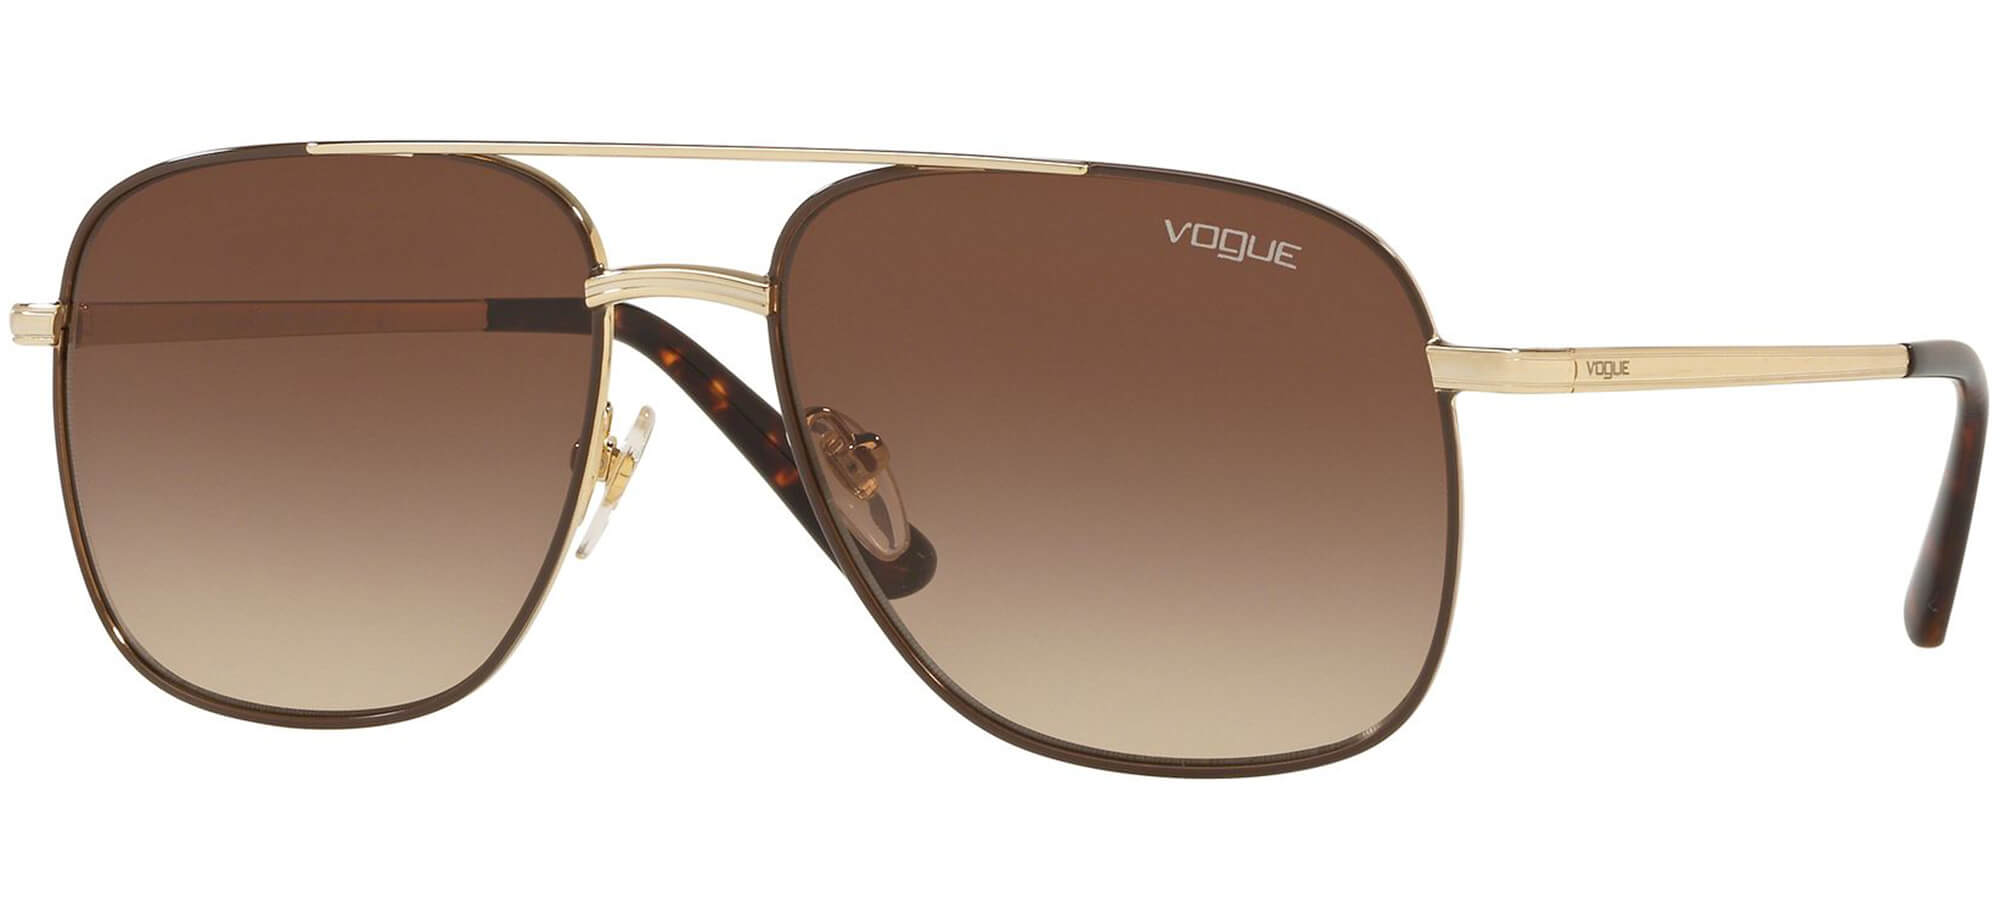 VogueVO 4083S BY GIGI HADIDGold Brown/brown Shaded (848/13 E)